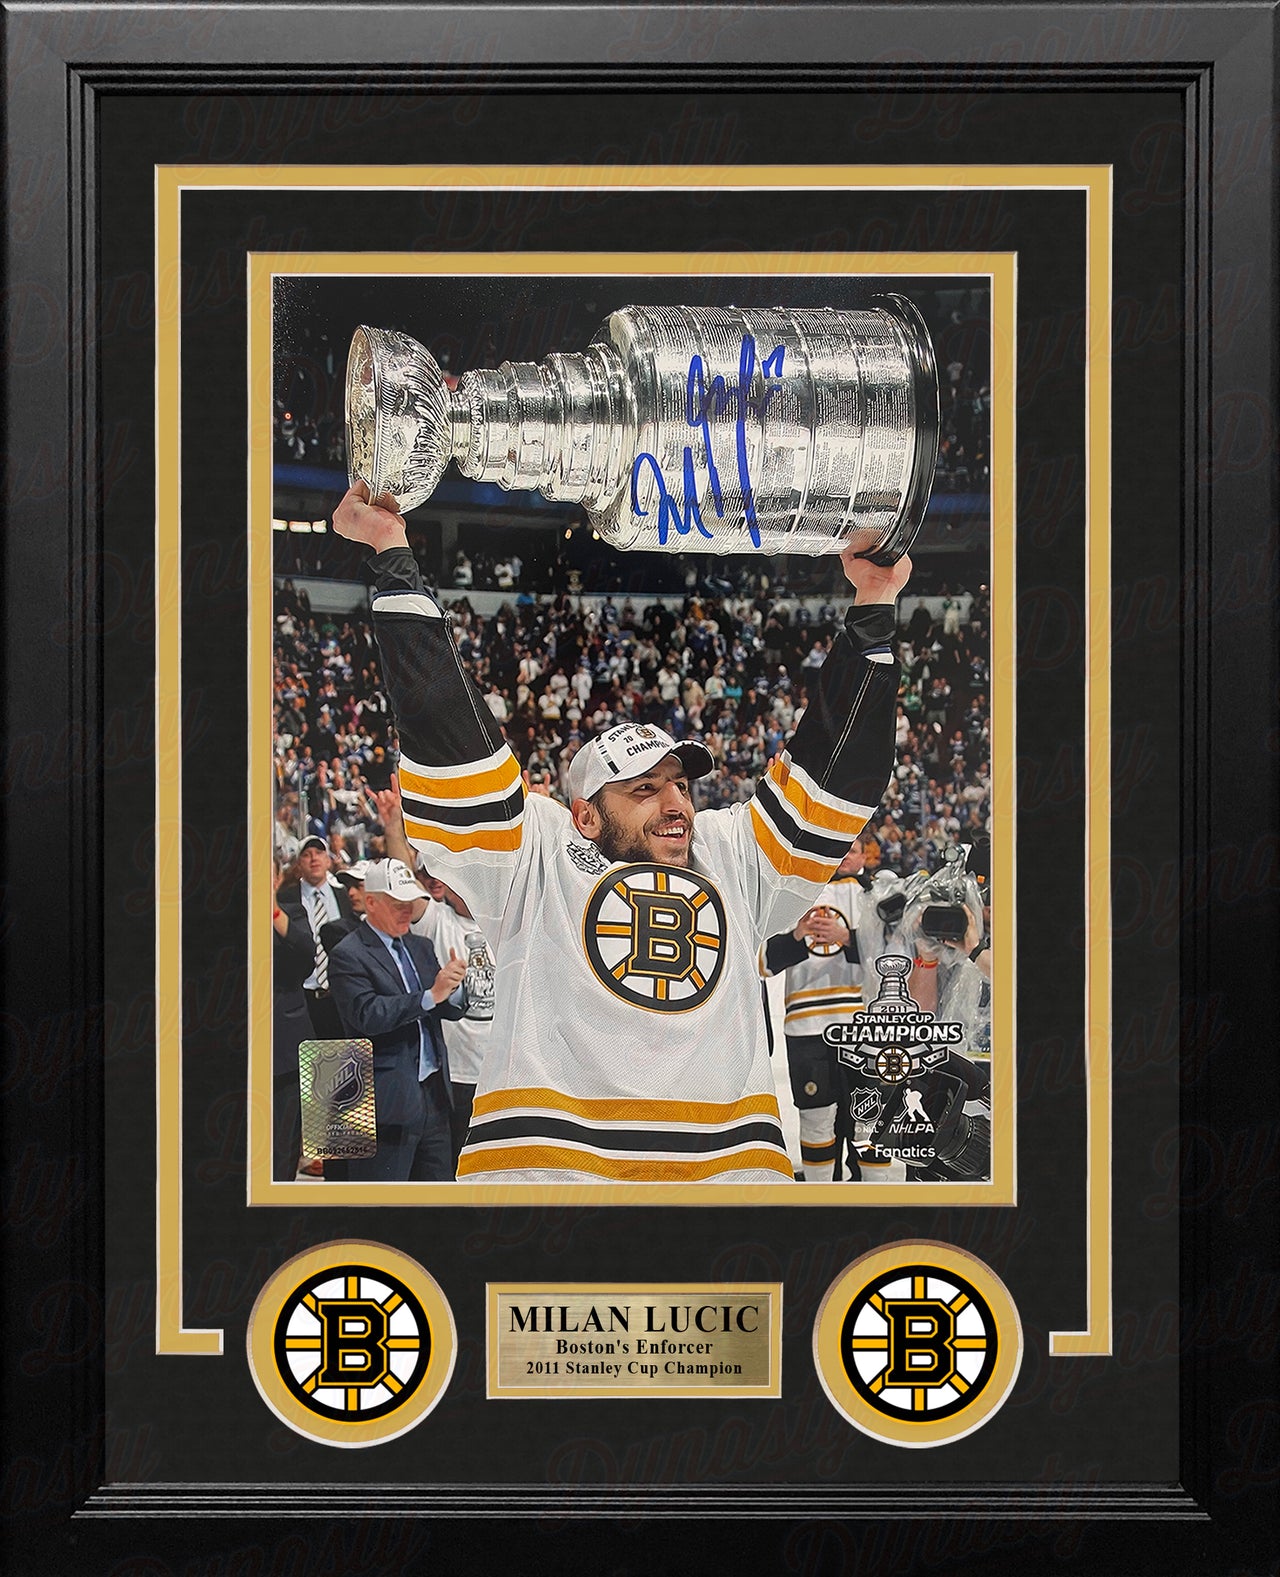 Milan Lucic 2011 Stanley Cup Boston Bruins Autographed 8" x 10" Framed Hockey Photo